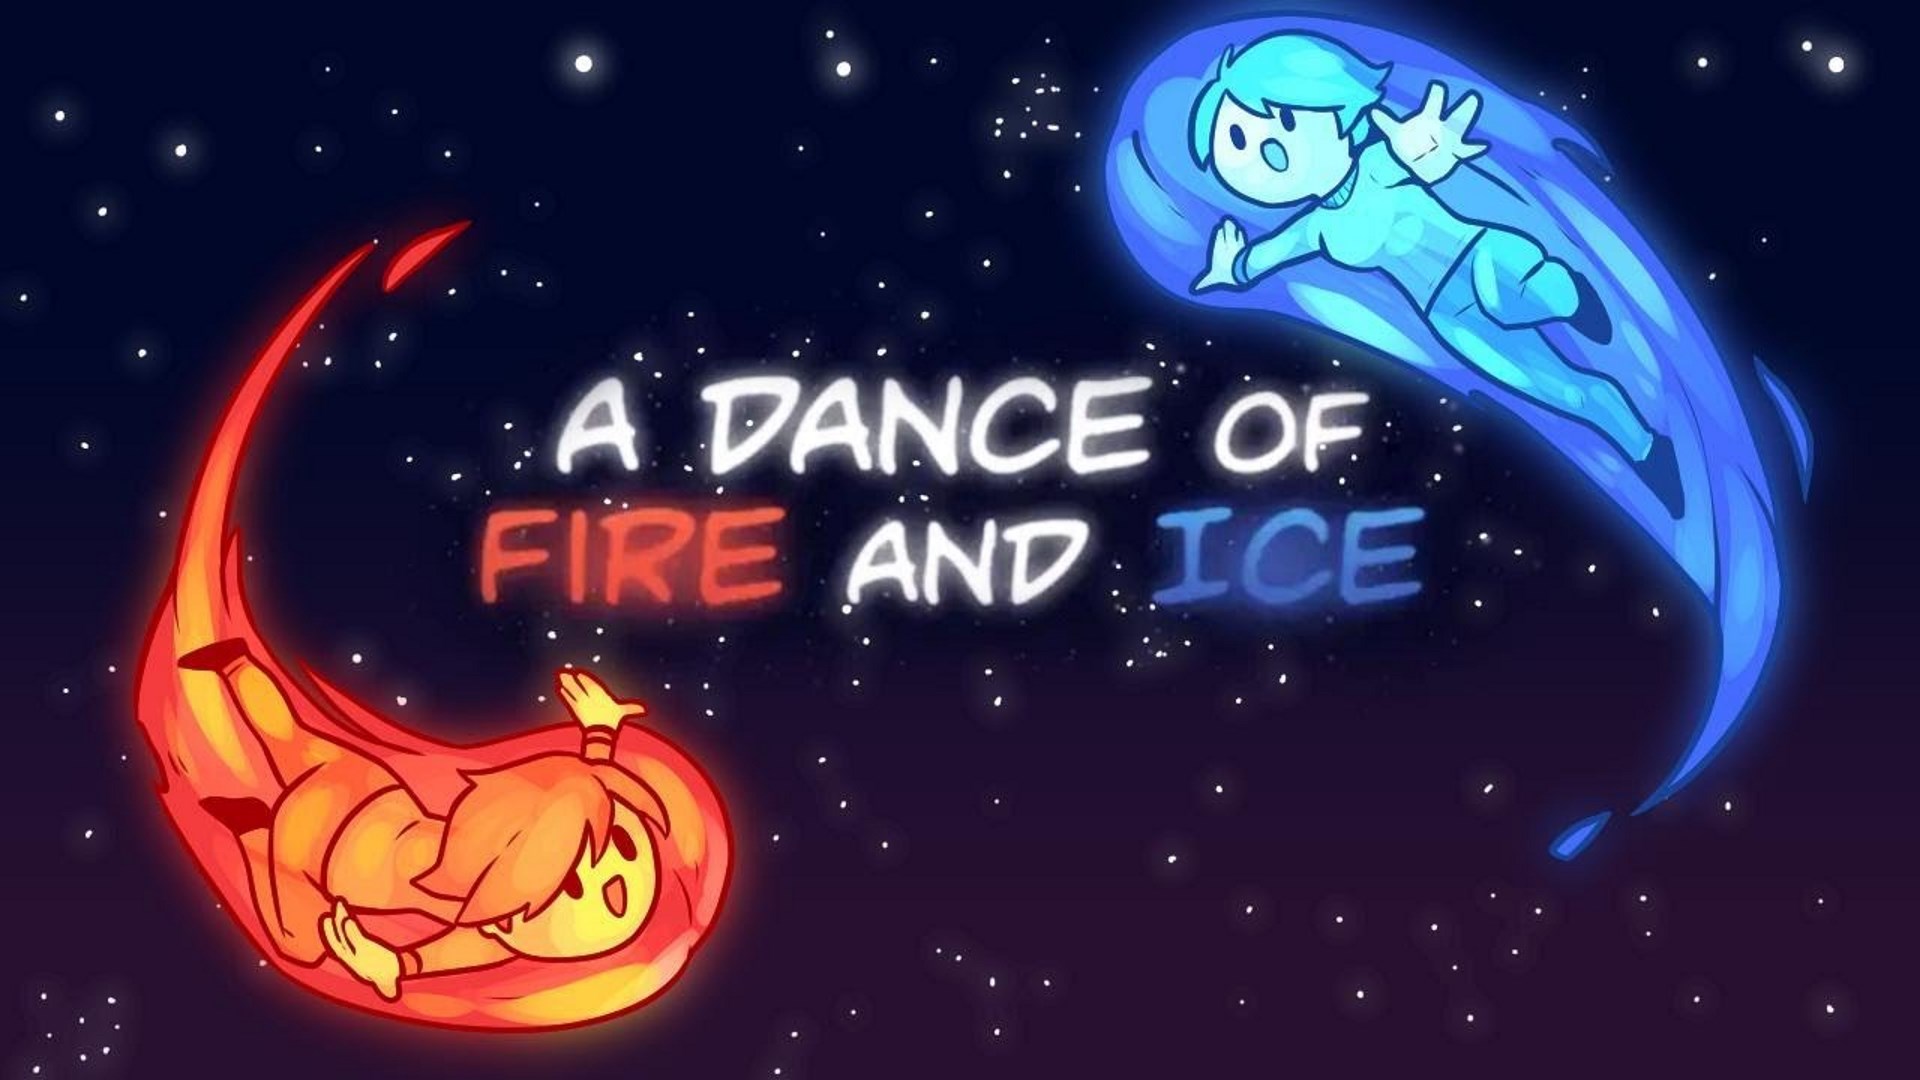 A dance of fire and ice free download windows